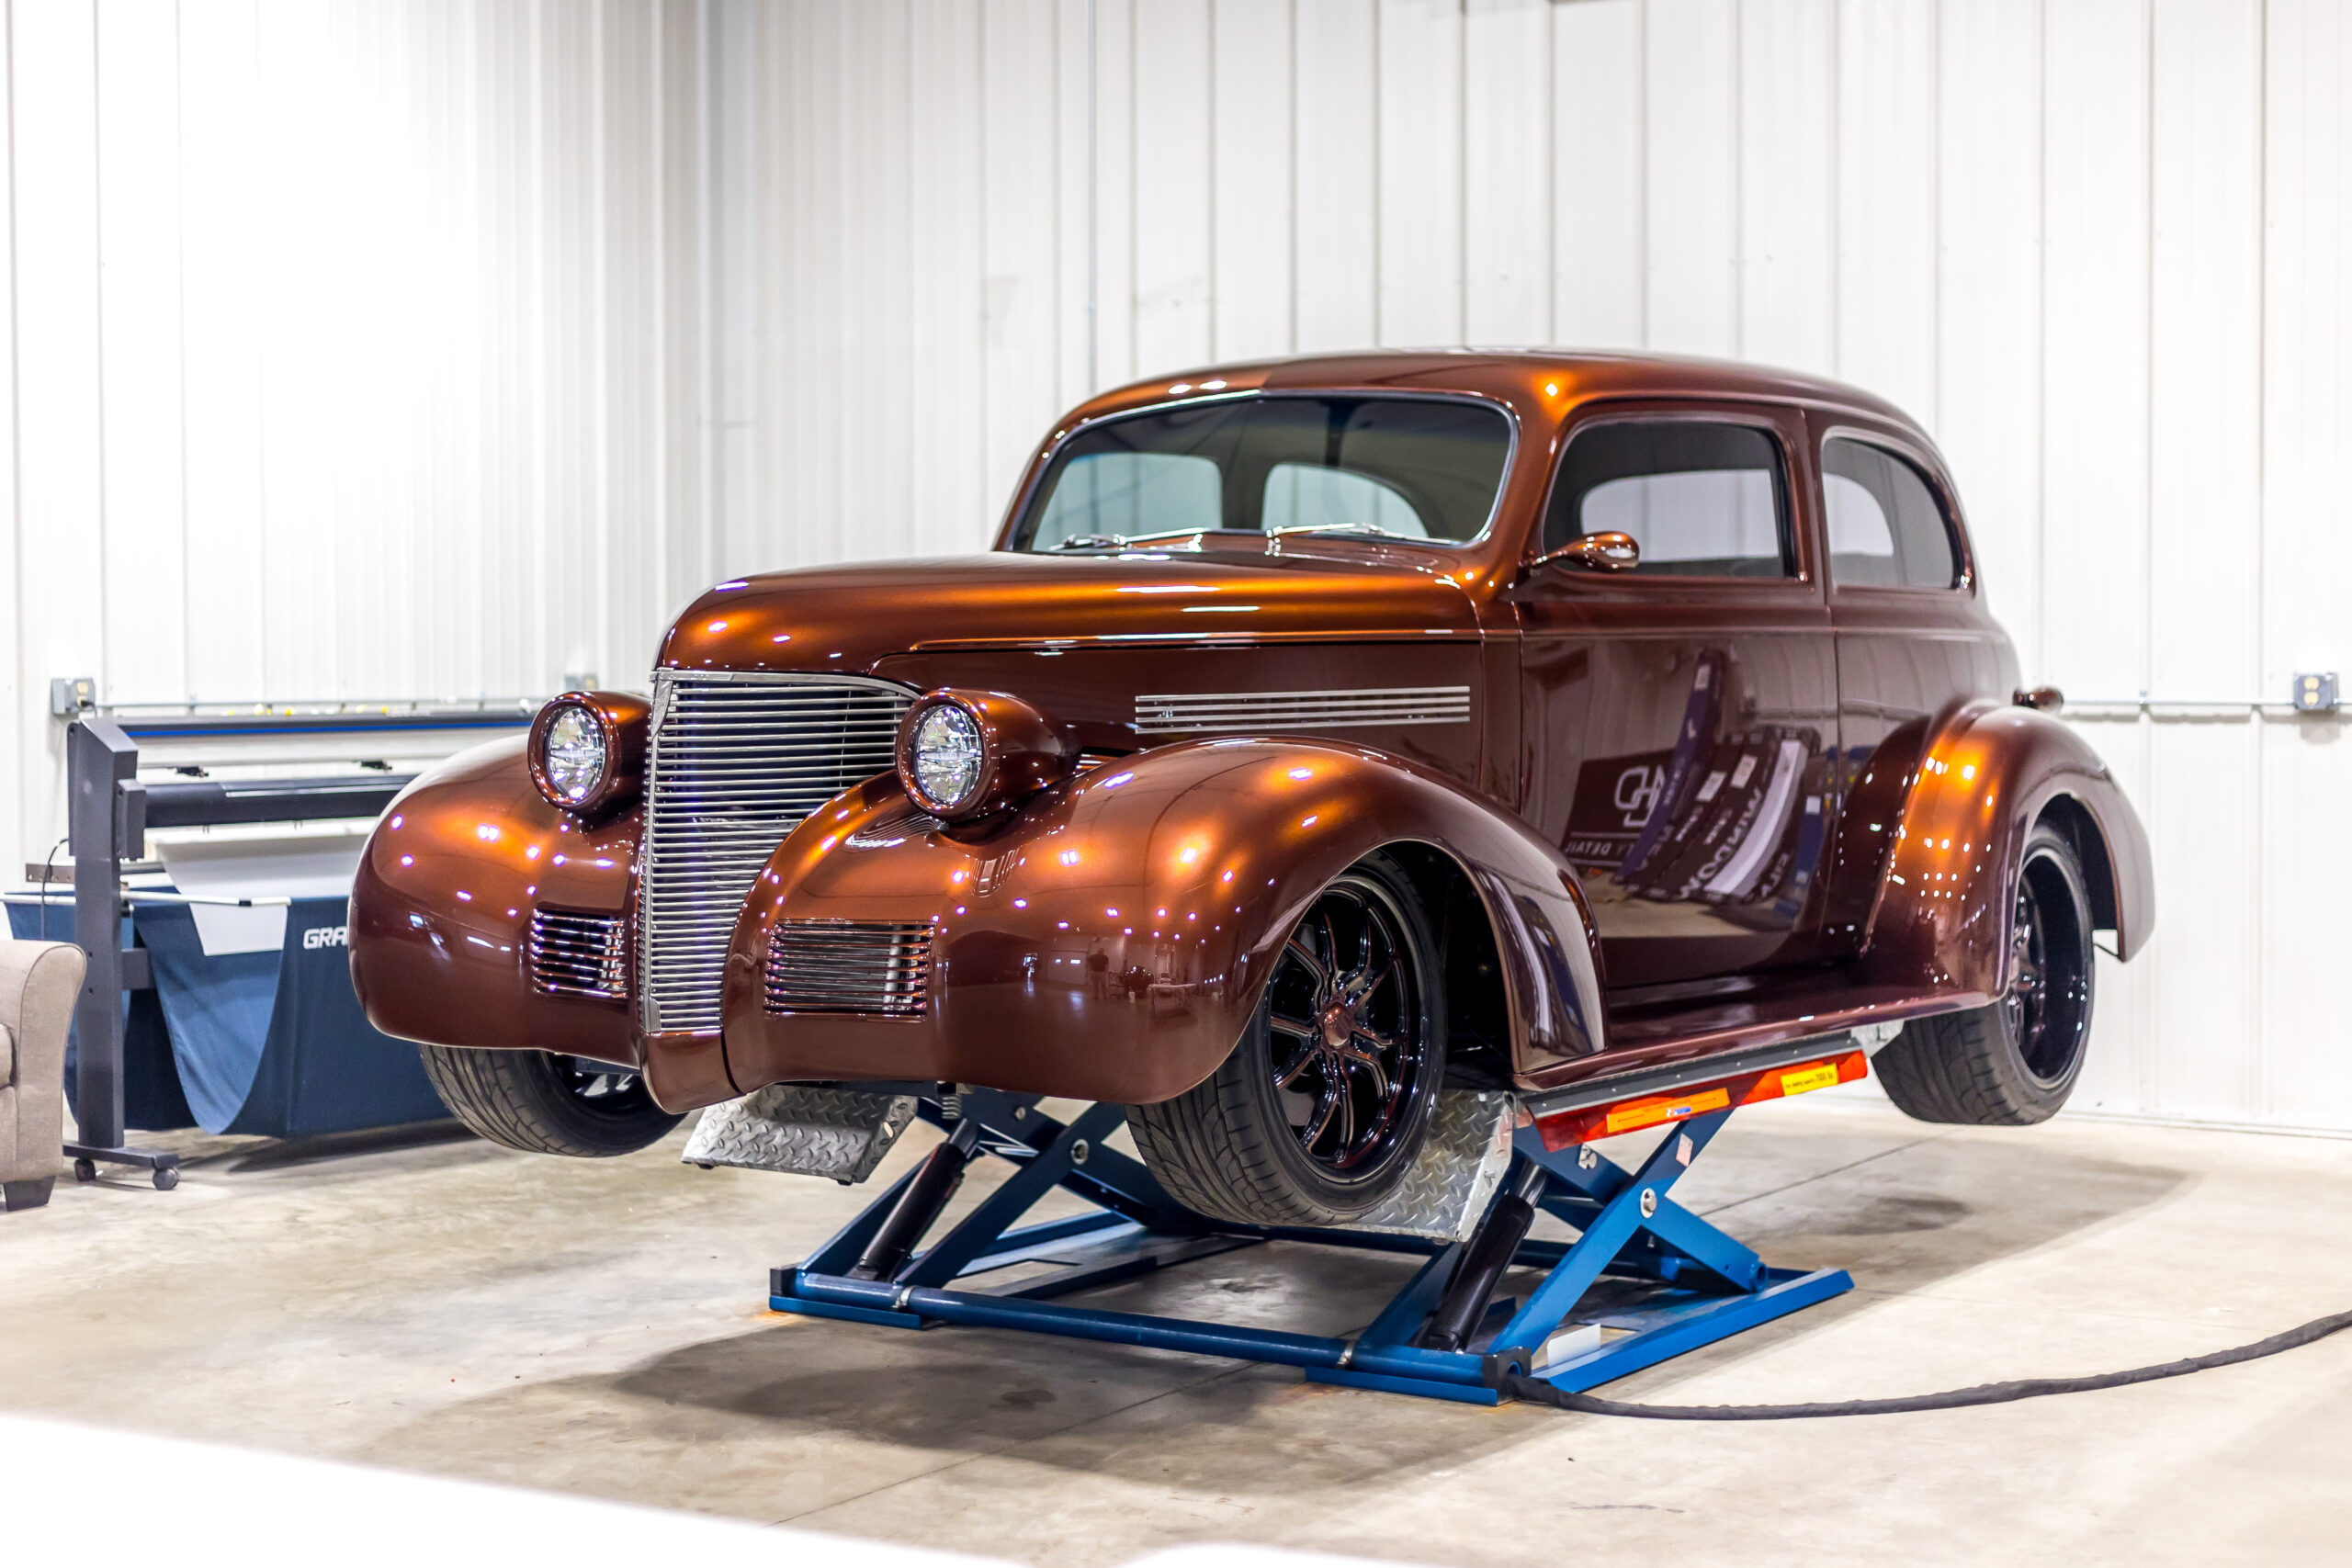 1939 Chevrolet Master Deluxe: Preserving Classic Elegance with PPF, Polishing, and Ceramic Coating